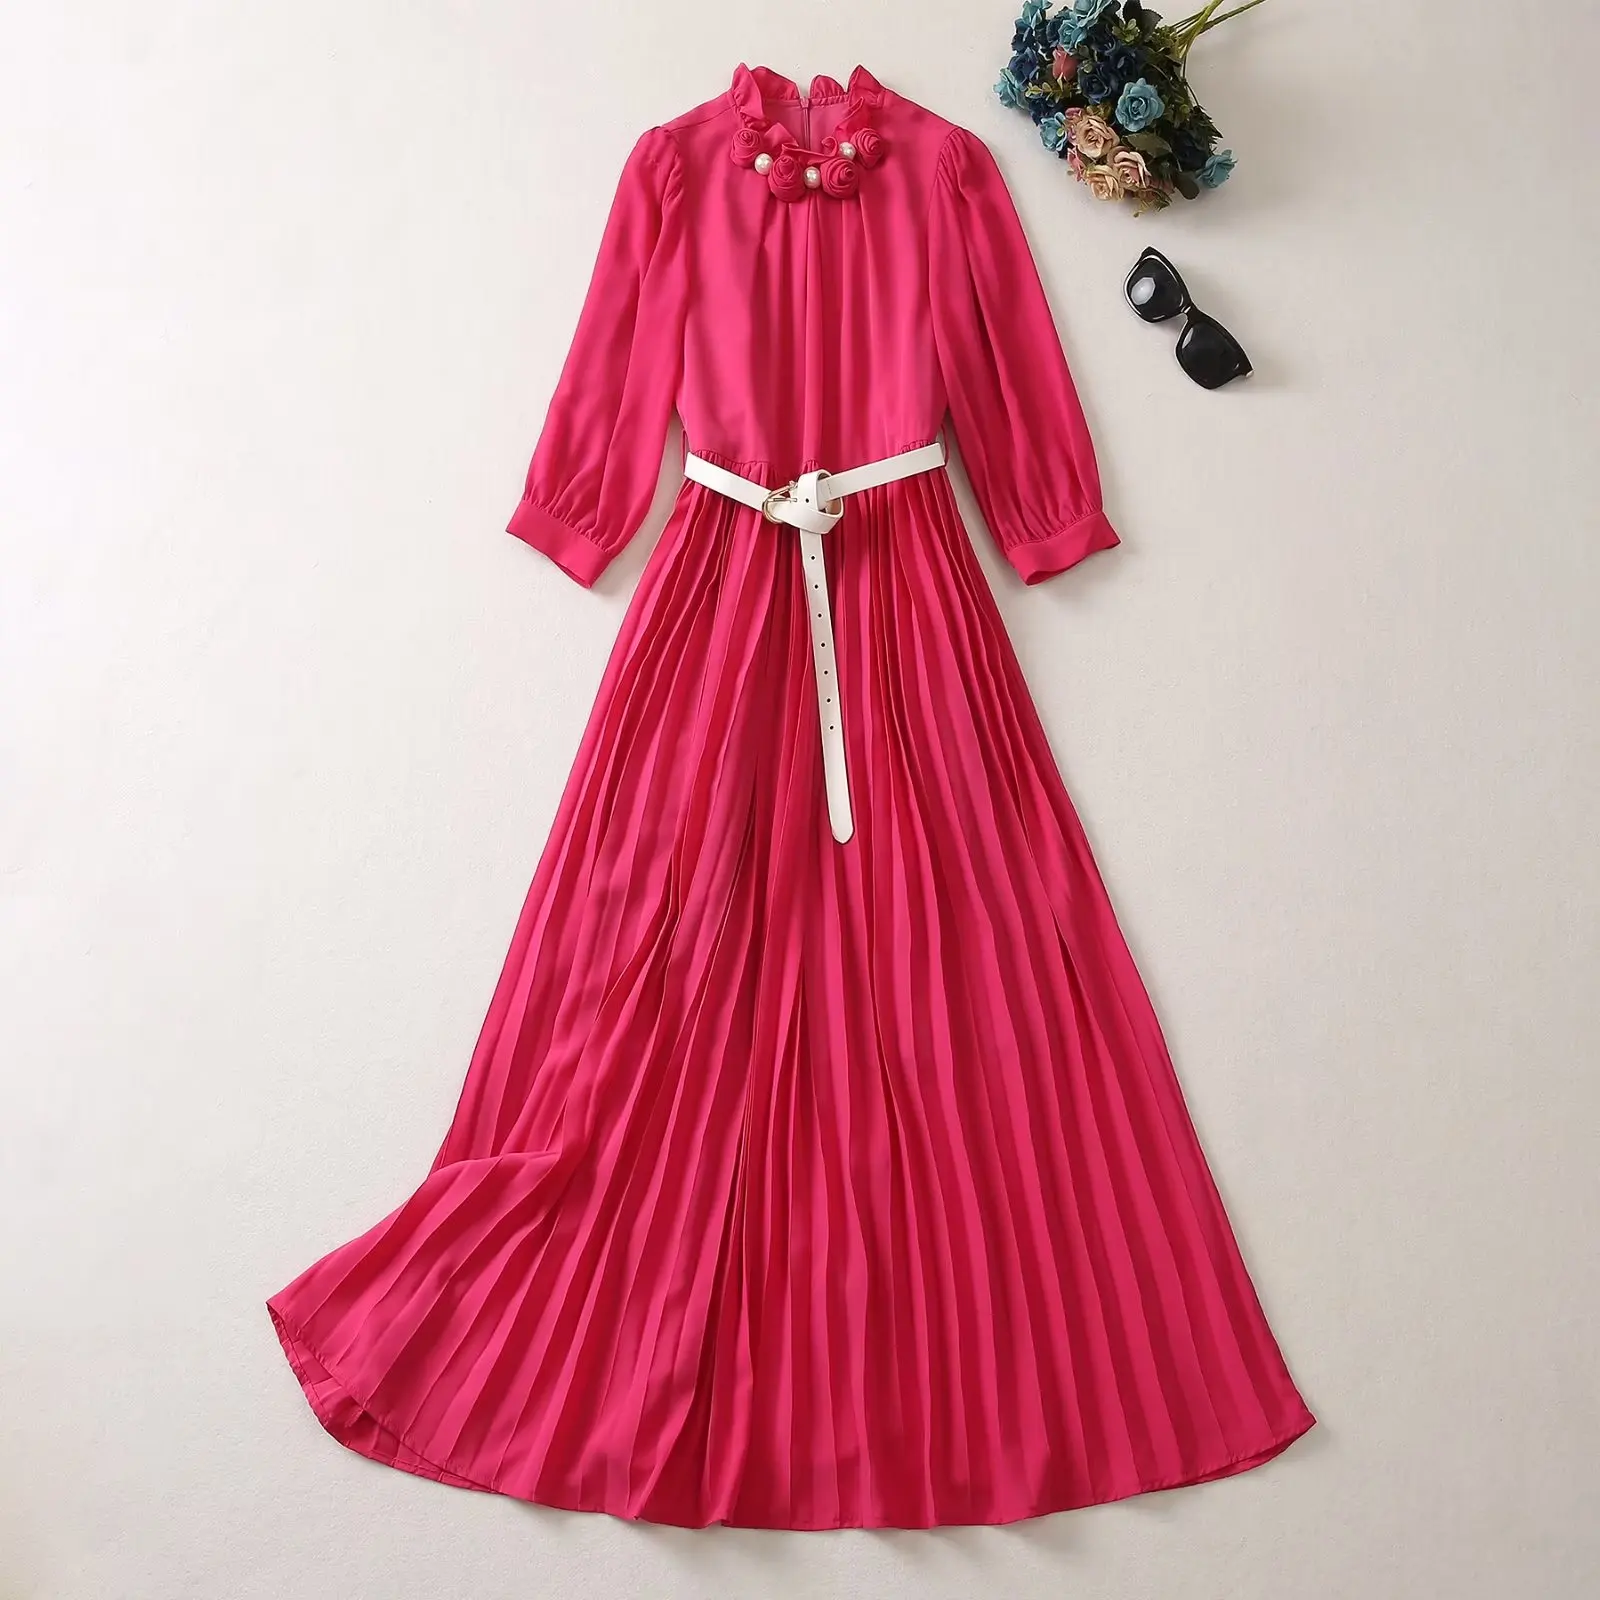 European and American women's dress 2023 summer new style Floral stand collar seven-point sleeves Fashion Belt Pleated dress XXL